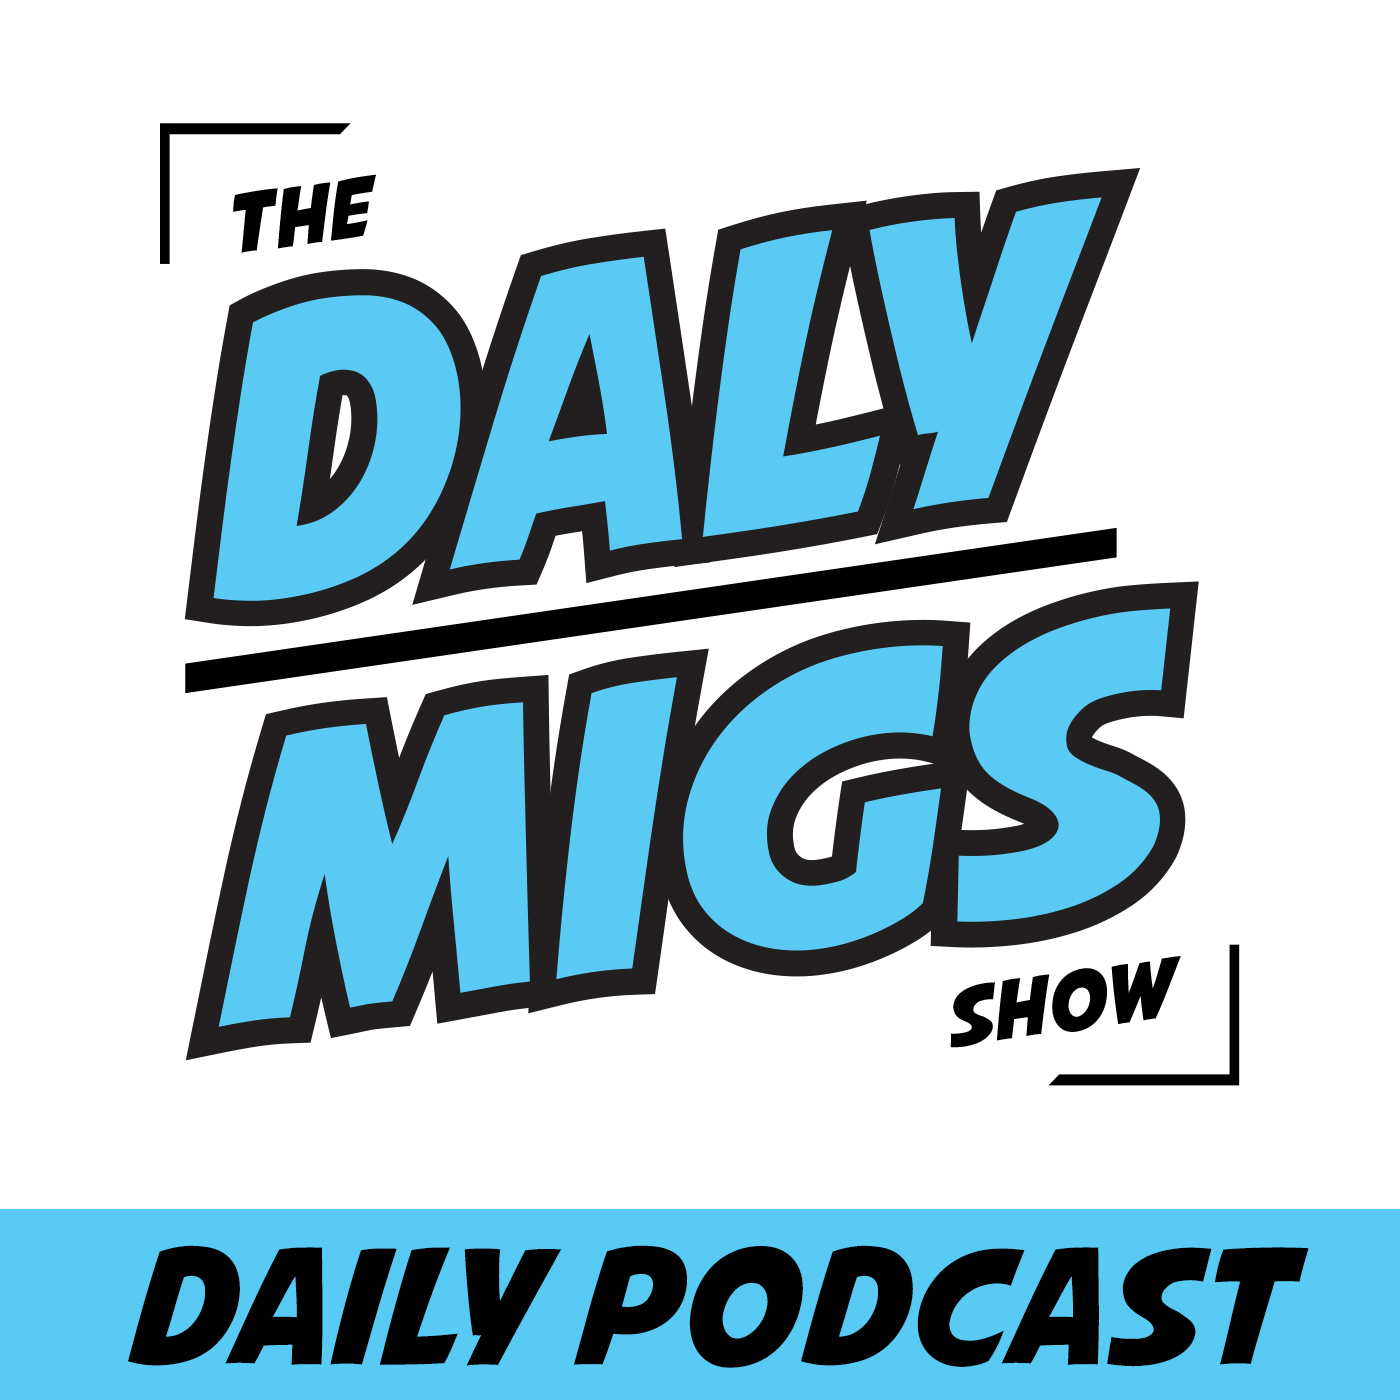 Daily Podcast pt. 2 - "Ryan Rowland-Smith joins us!"